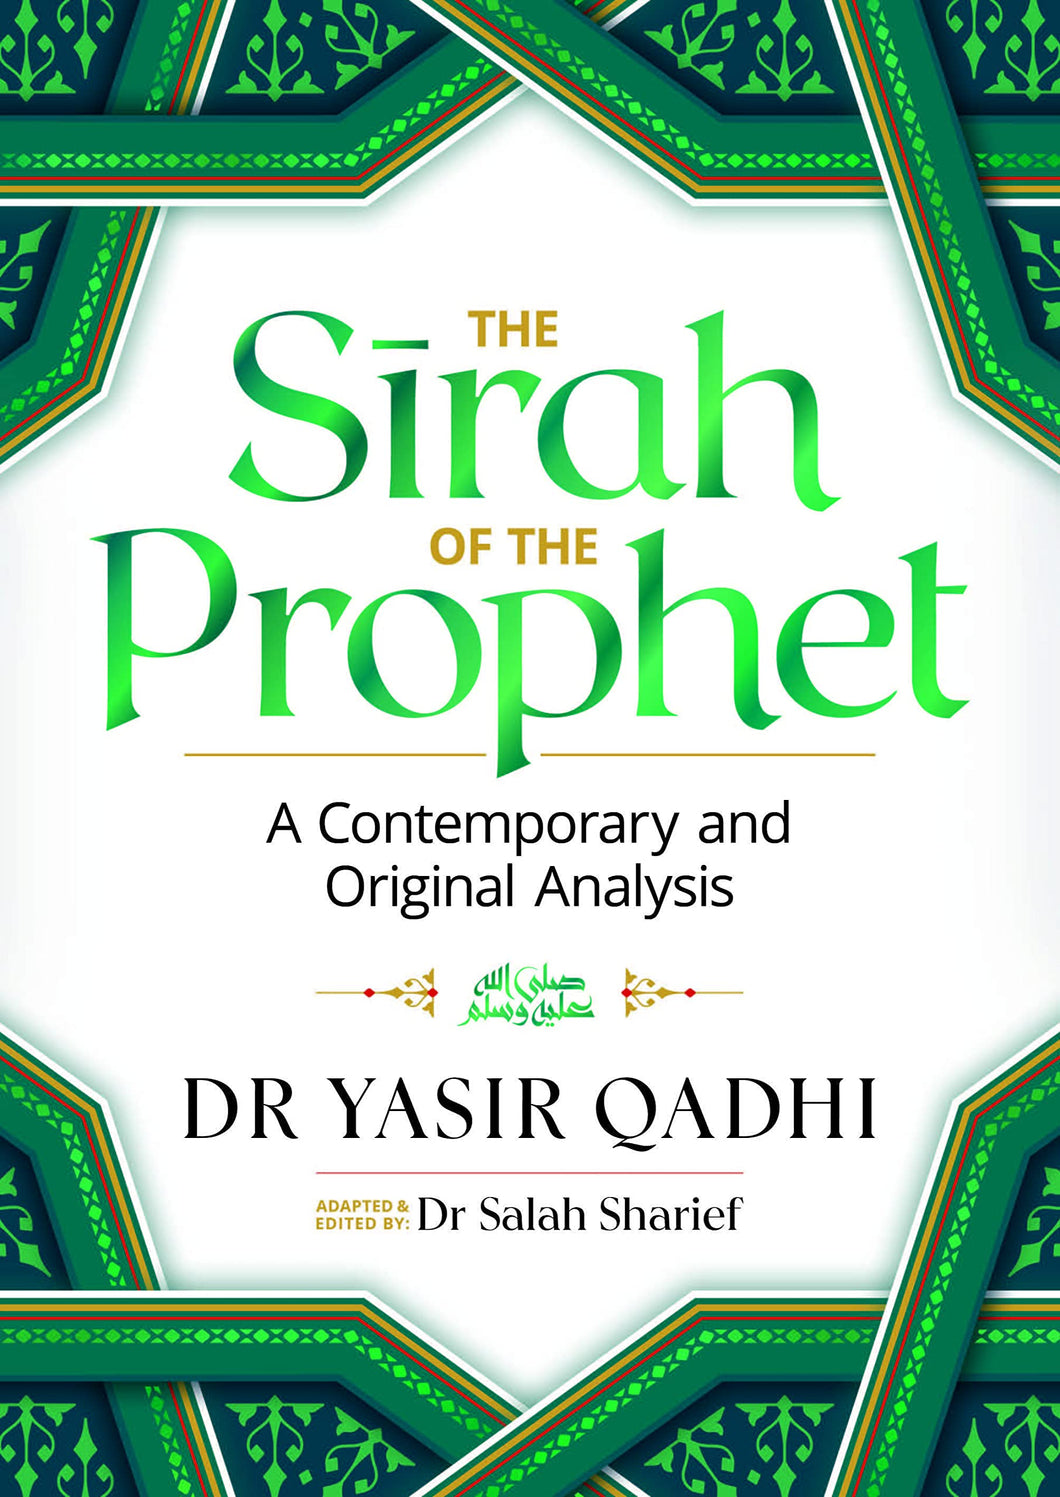 The Sirah of the Prophet (Pbuh): A Contemporary and Original Analysis - by Yasir Qadhi (Paperback)